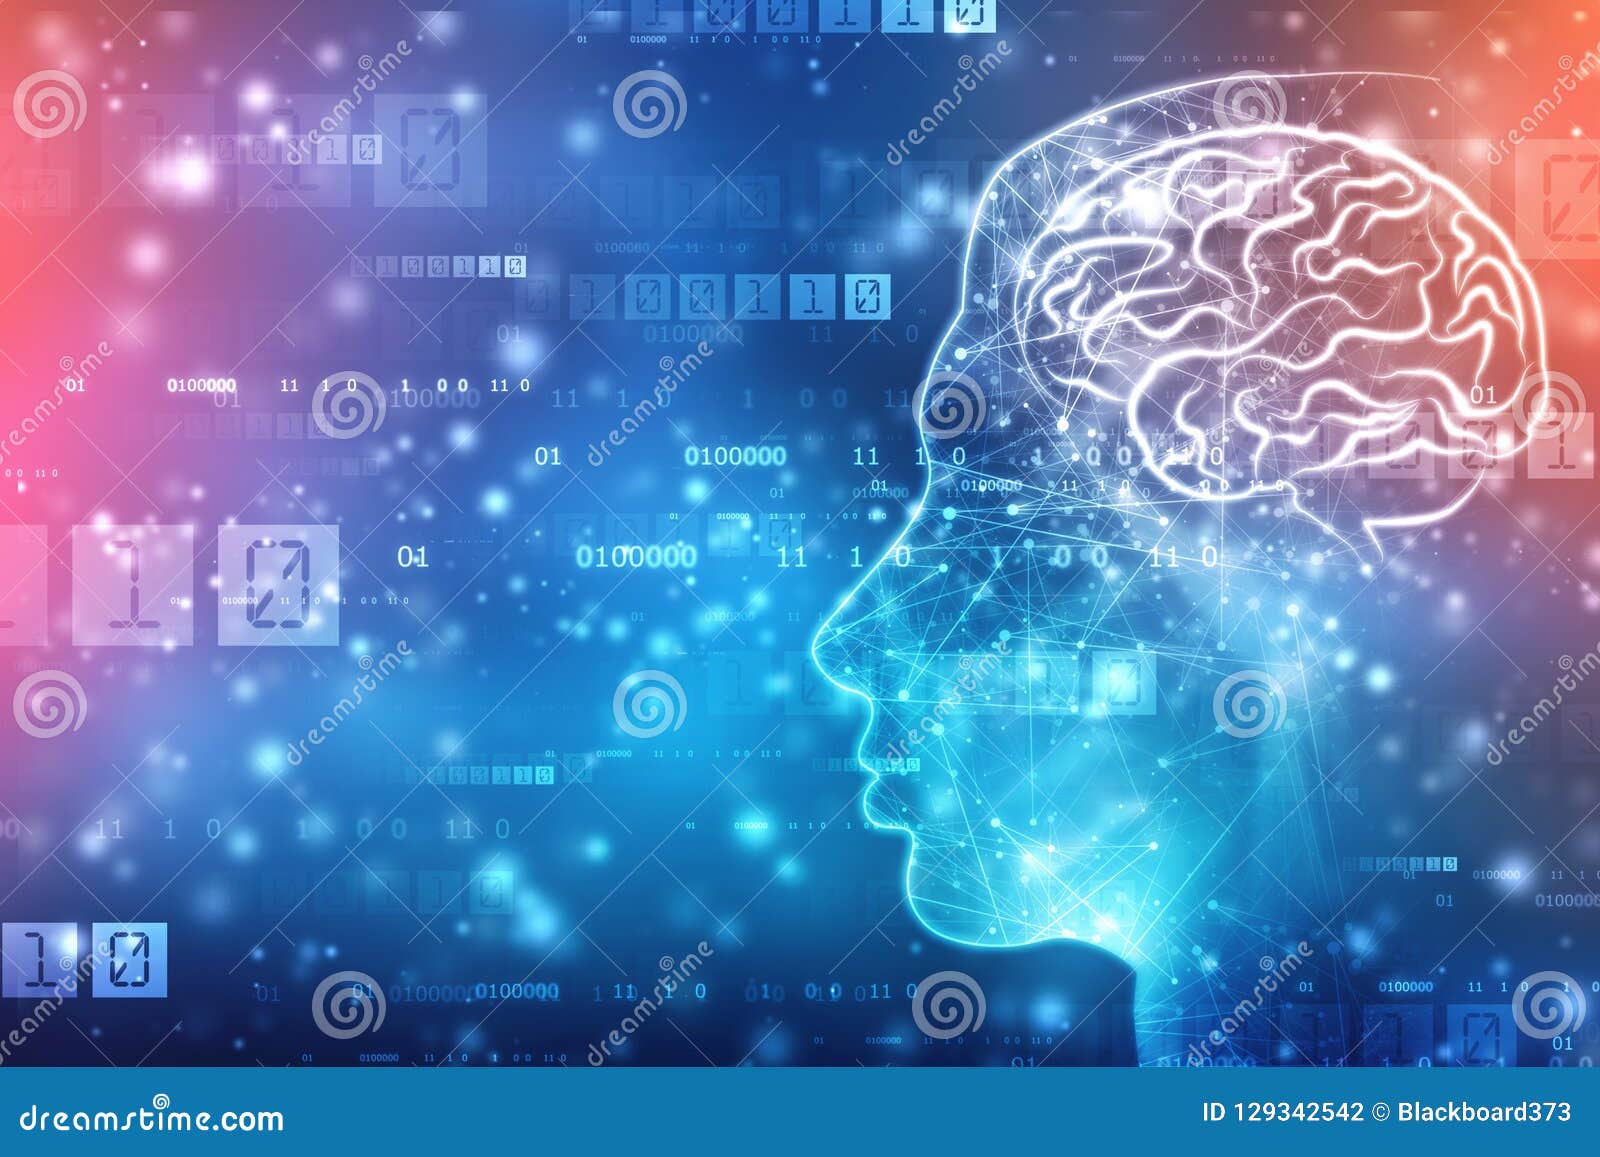 abstract artificial intelligence. creative brain concept, technology web background